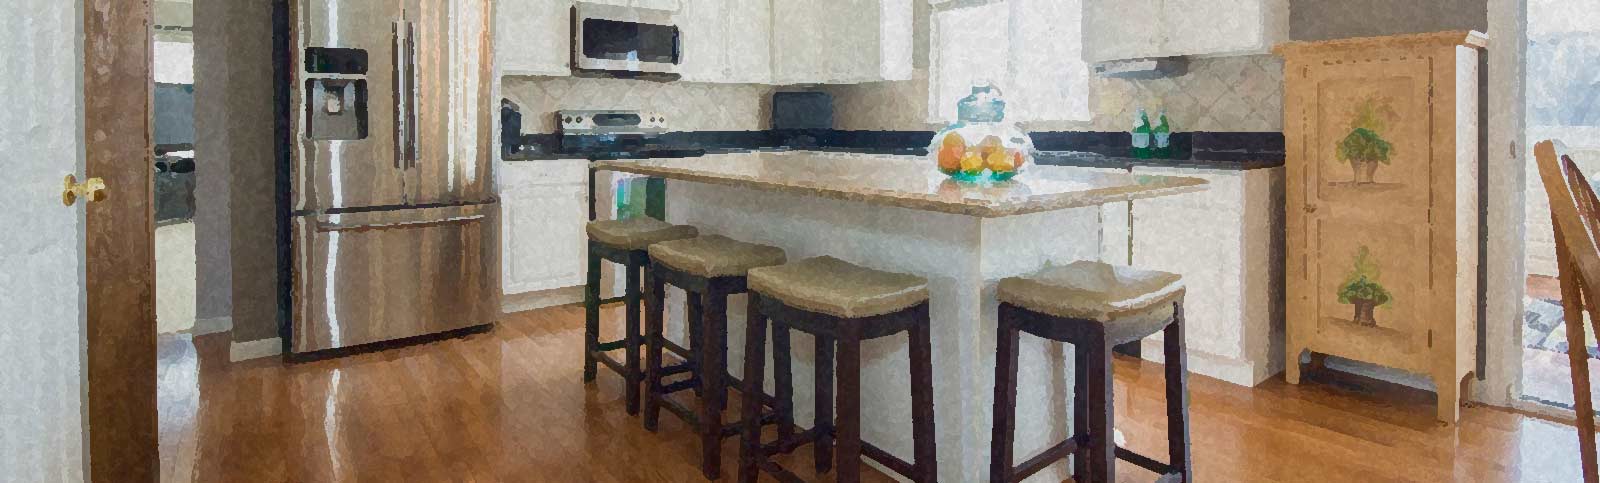 How to Get Quality Granite Countertops in New England